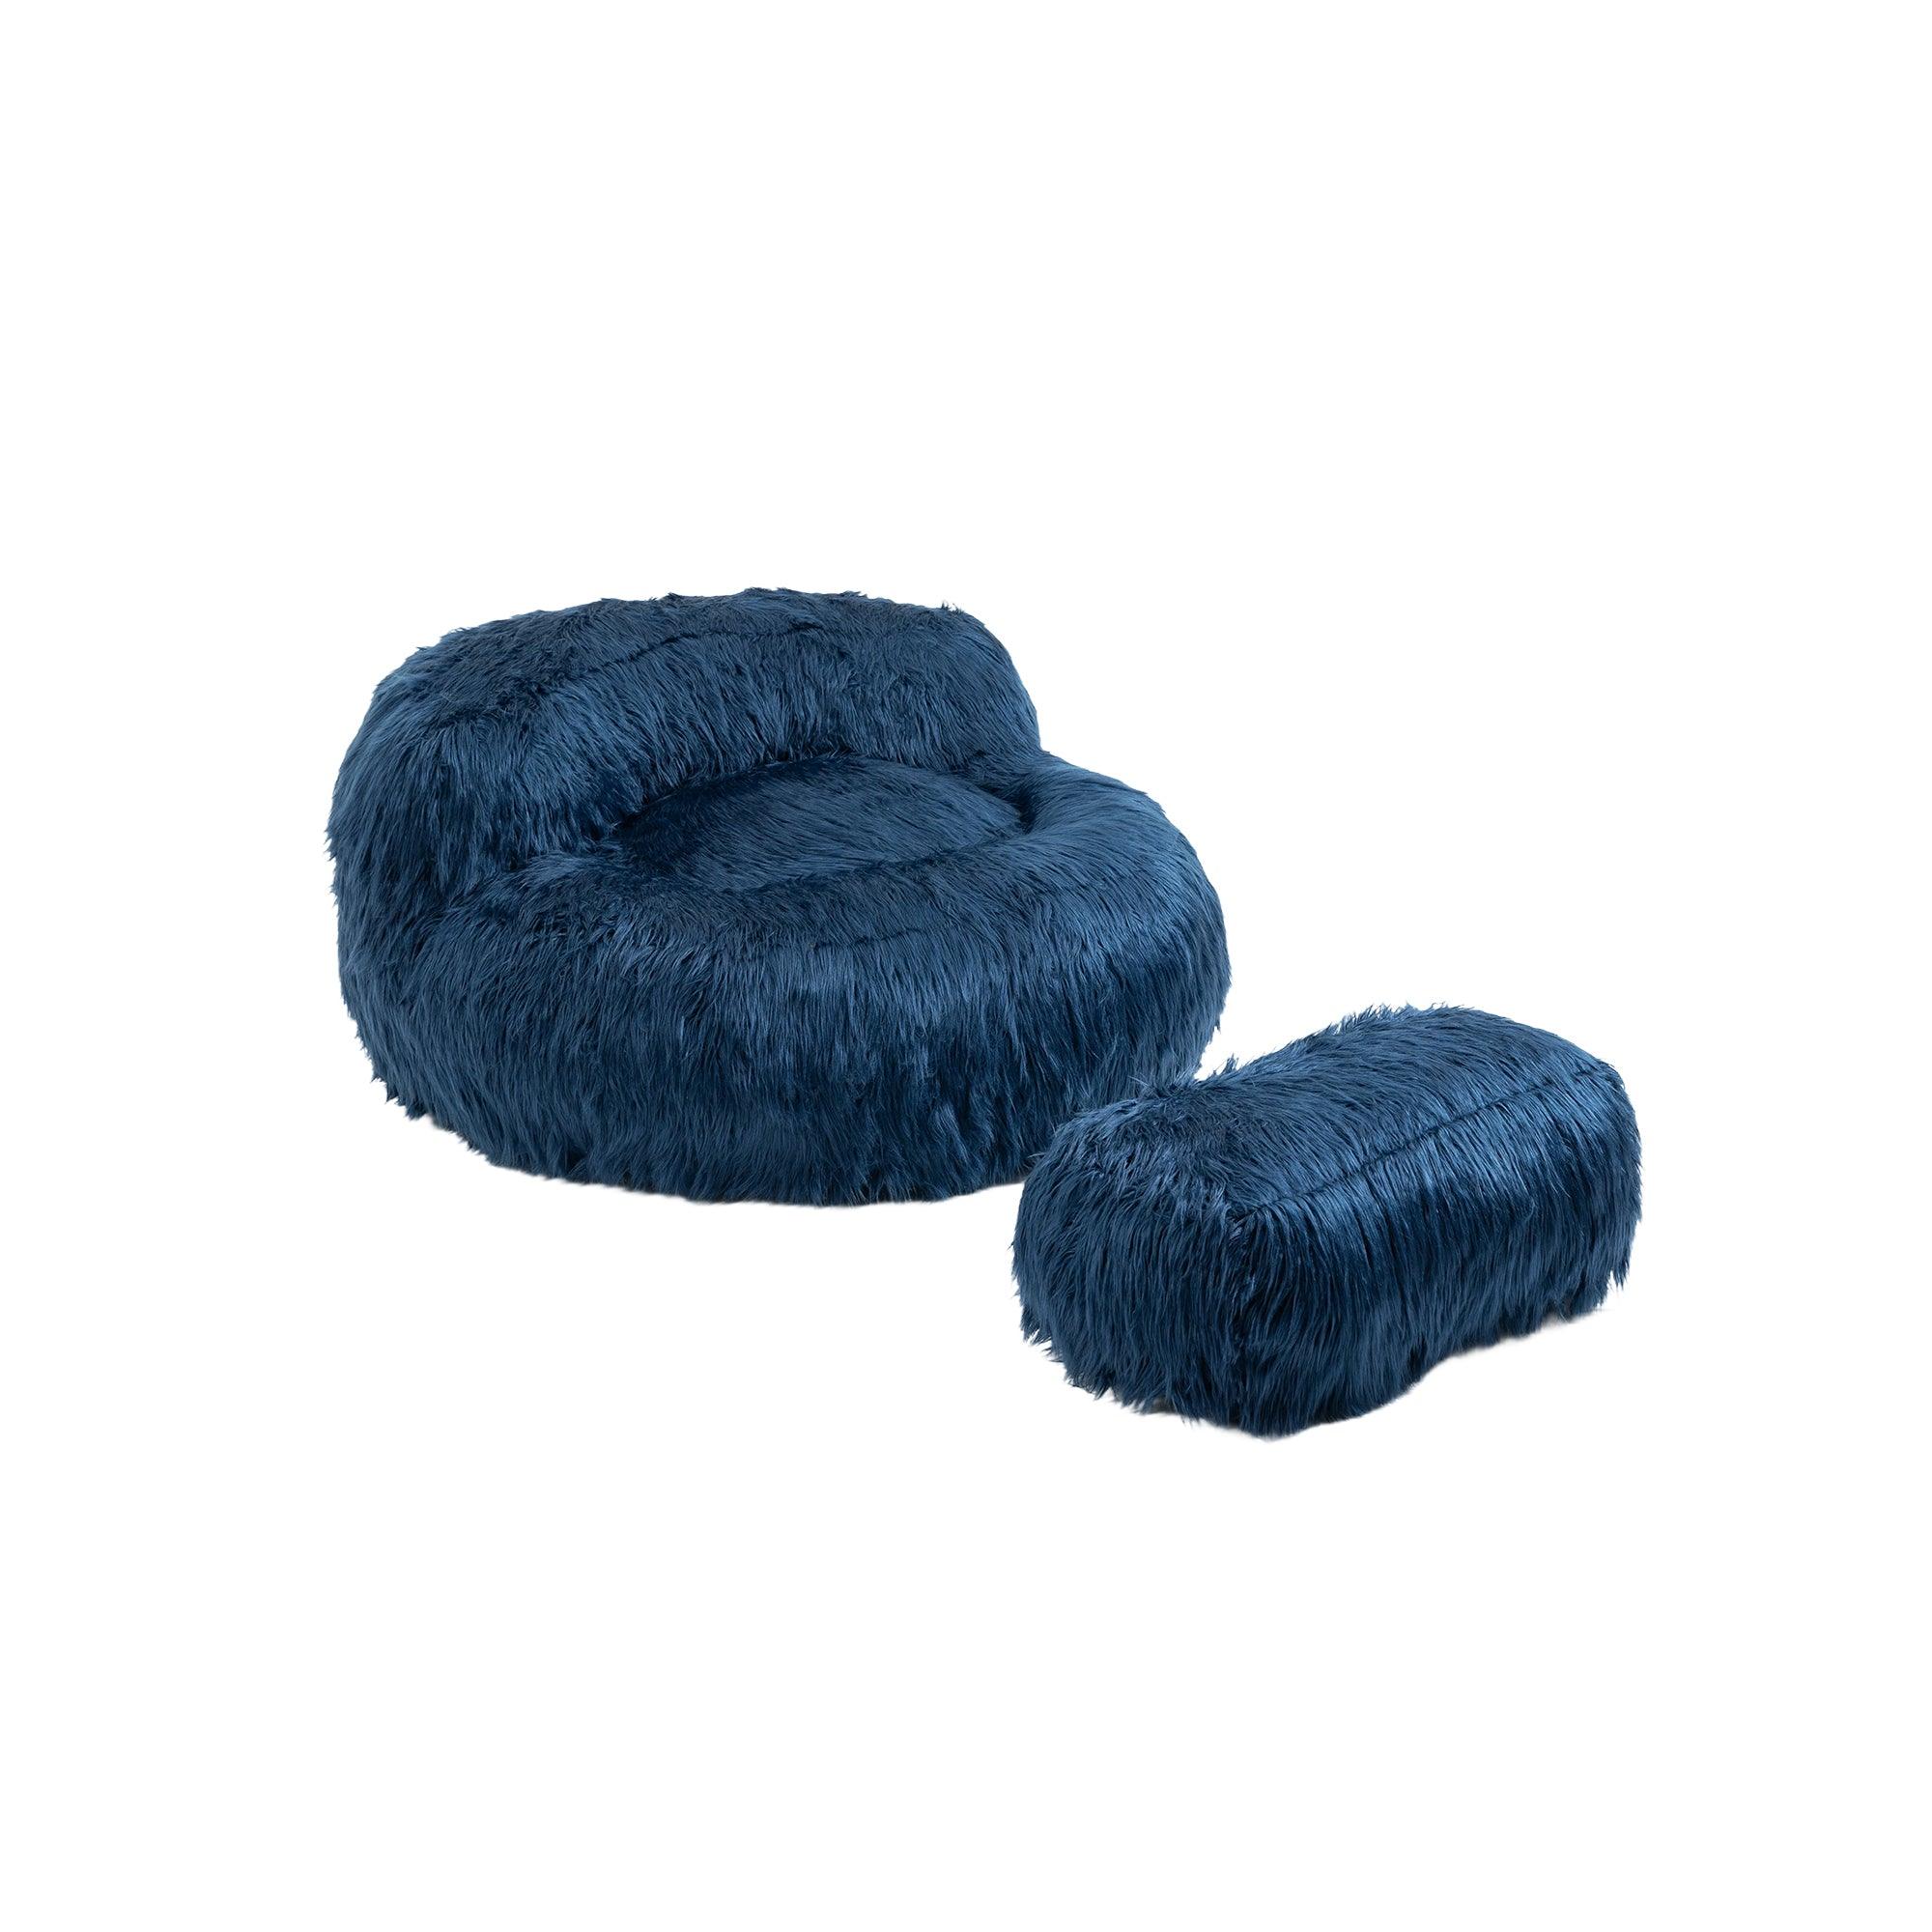 Gramanda 2-In-1 Bean Bag Chair Faux Fur Lazy Sofa & Ottoman Footstool For Adults And Kids - Navy